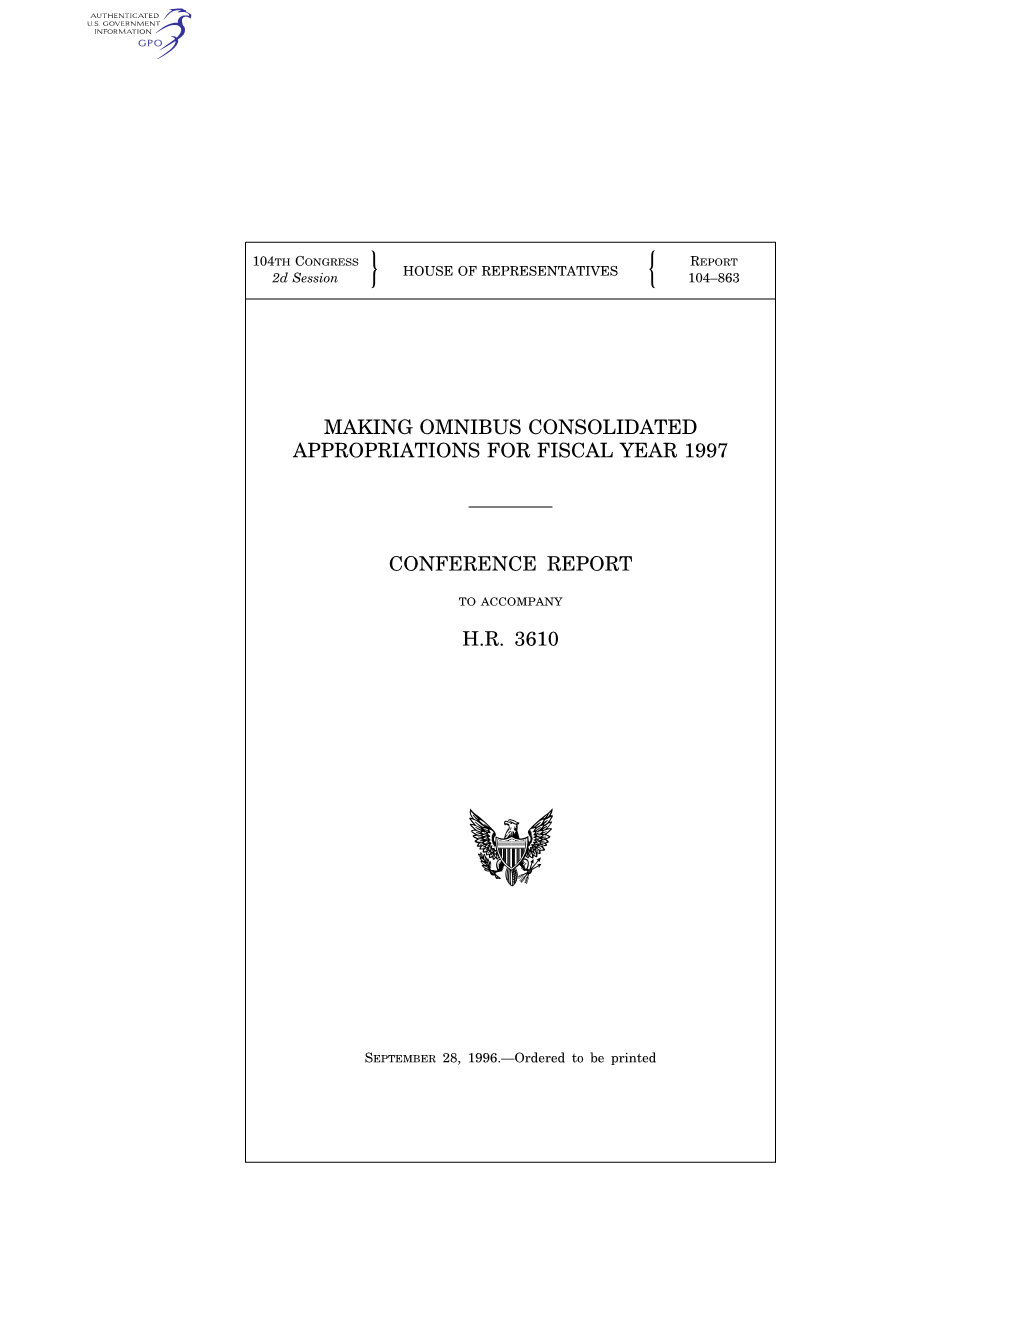 Making Omnibus Consolidated Appropriations for Fiscal Year 1997